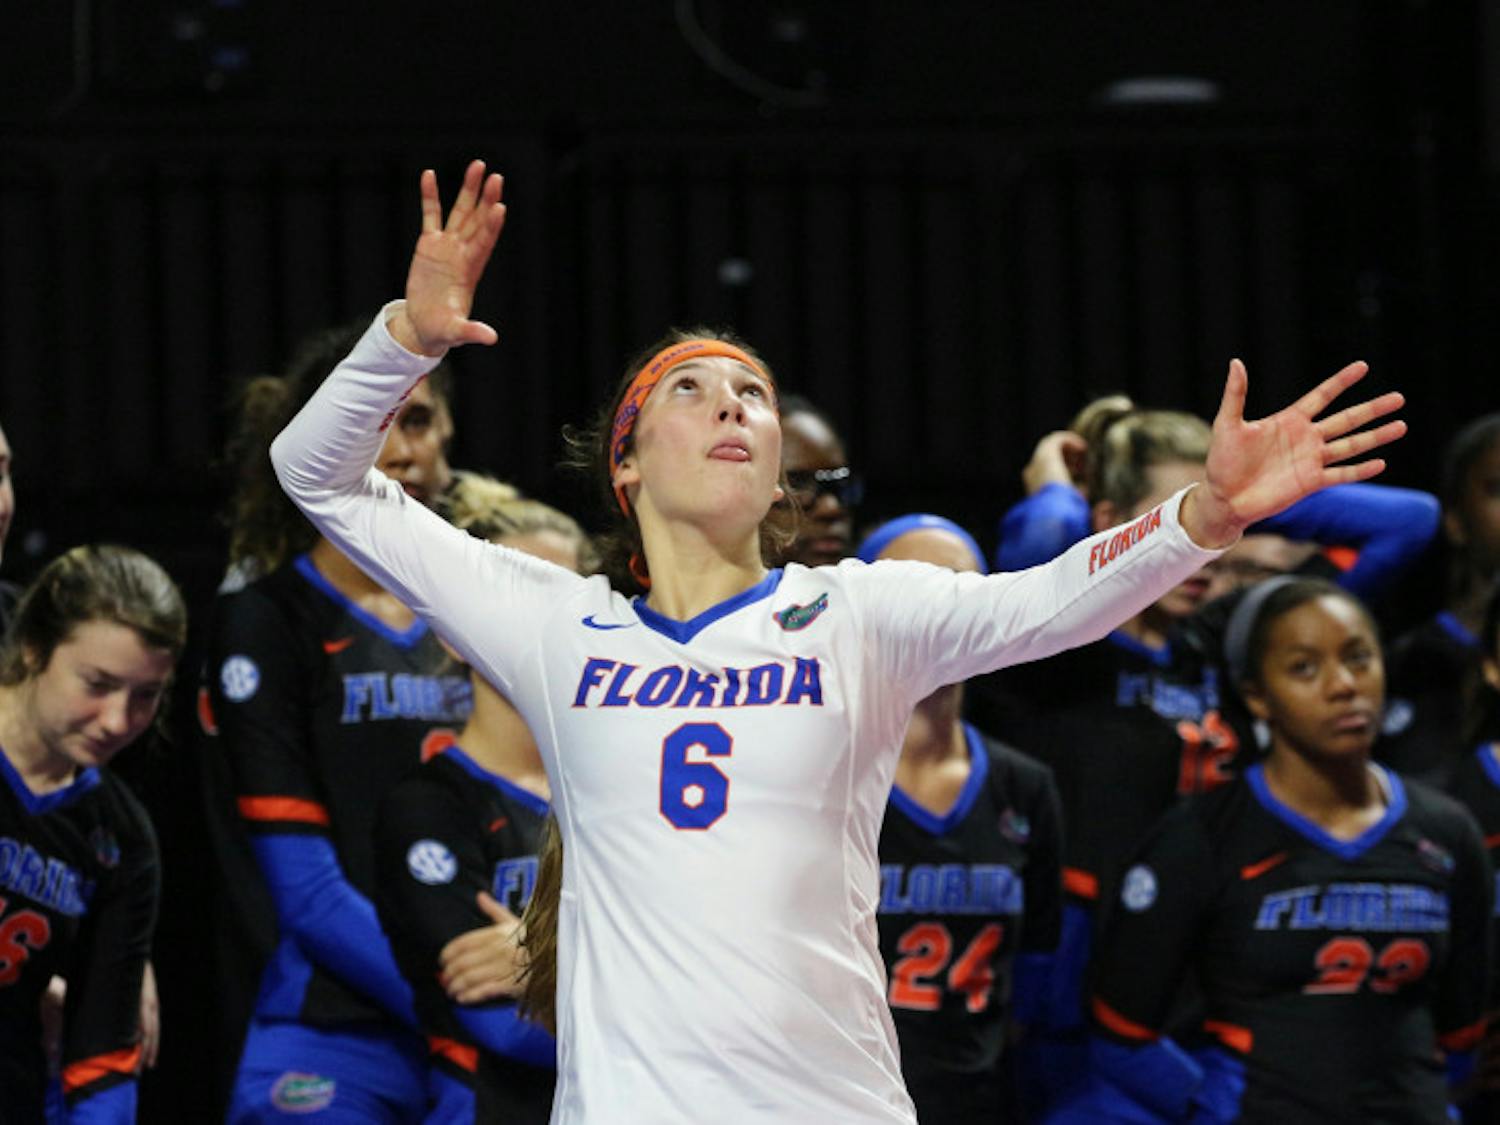 Caroline Knop and the Gators volleyball team is looking to put their loss to Kentucky behind them. “We want to be peaking in December and not October, so for us to put that loss behind us will be really important,” Knop said.